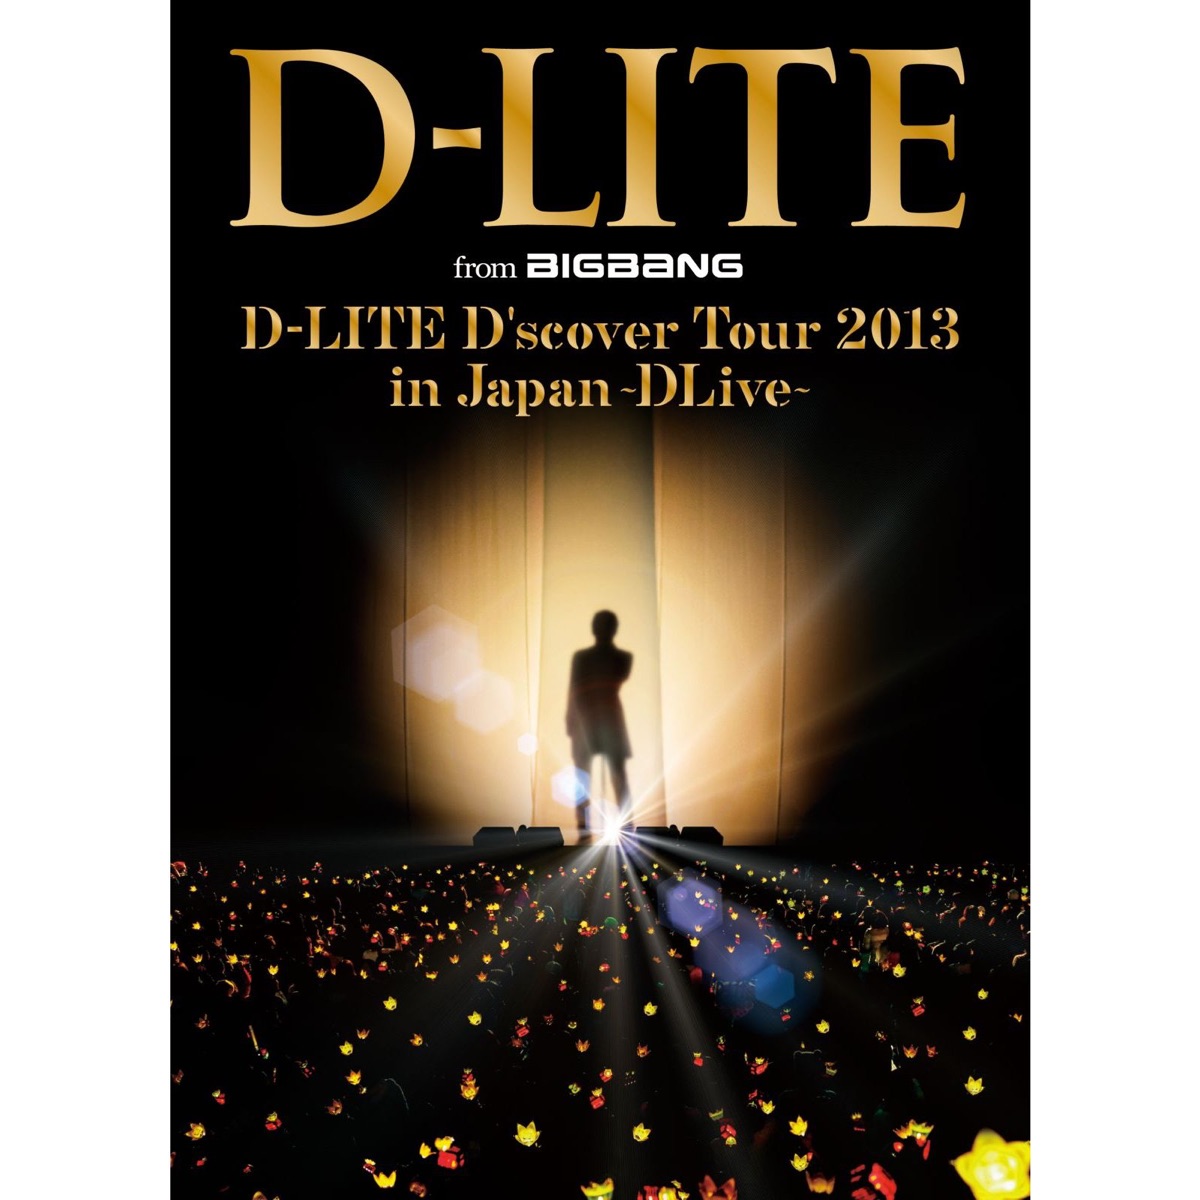 D-LITE (from BIGBANG) – D-LITE D’scover Tour 2013 in Japan ～DLive～